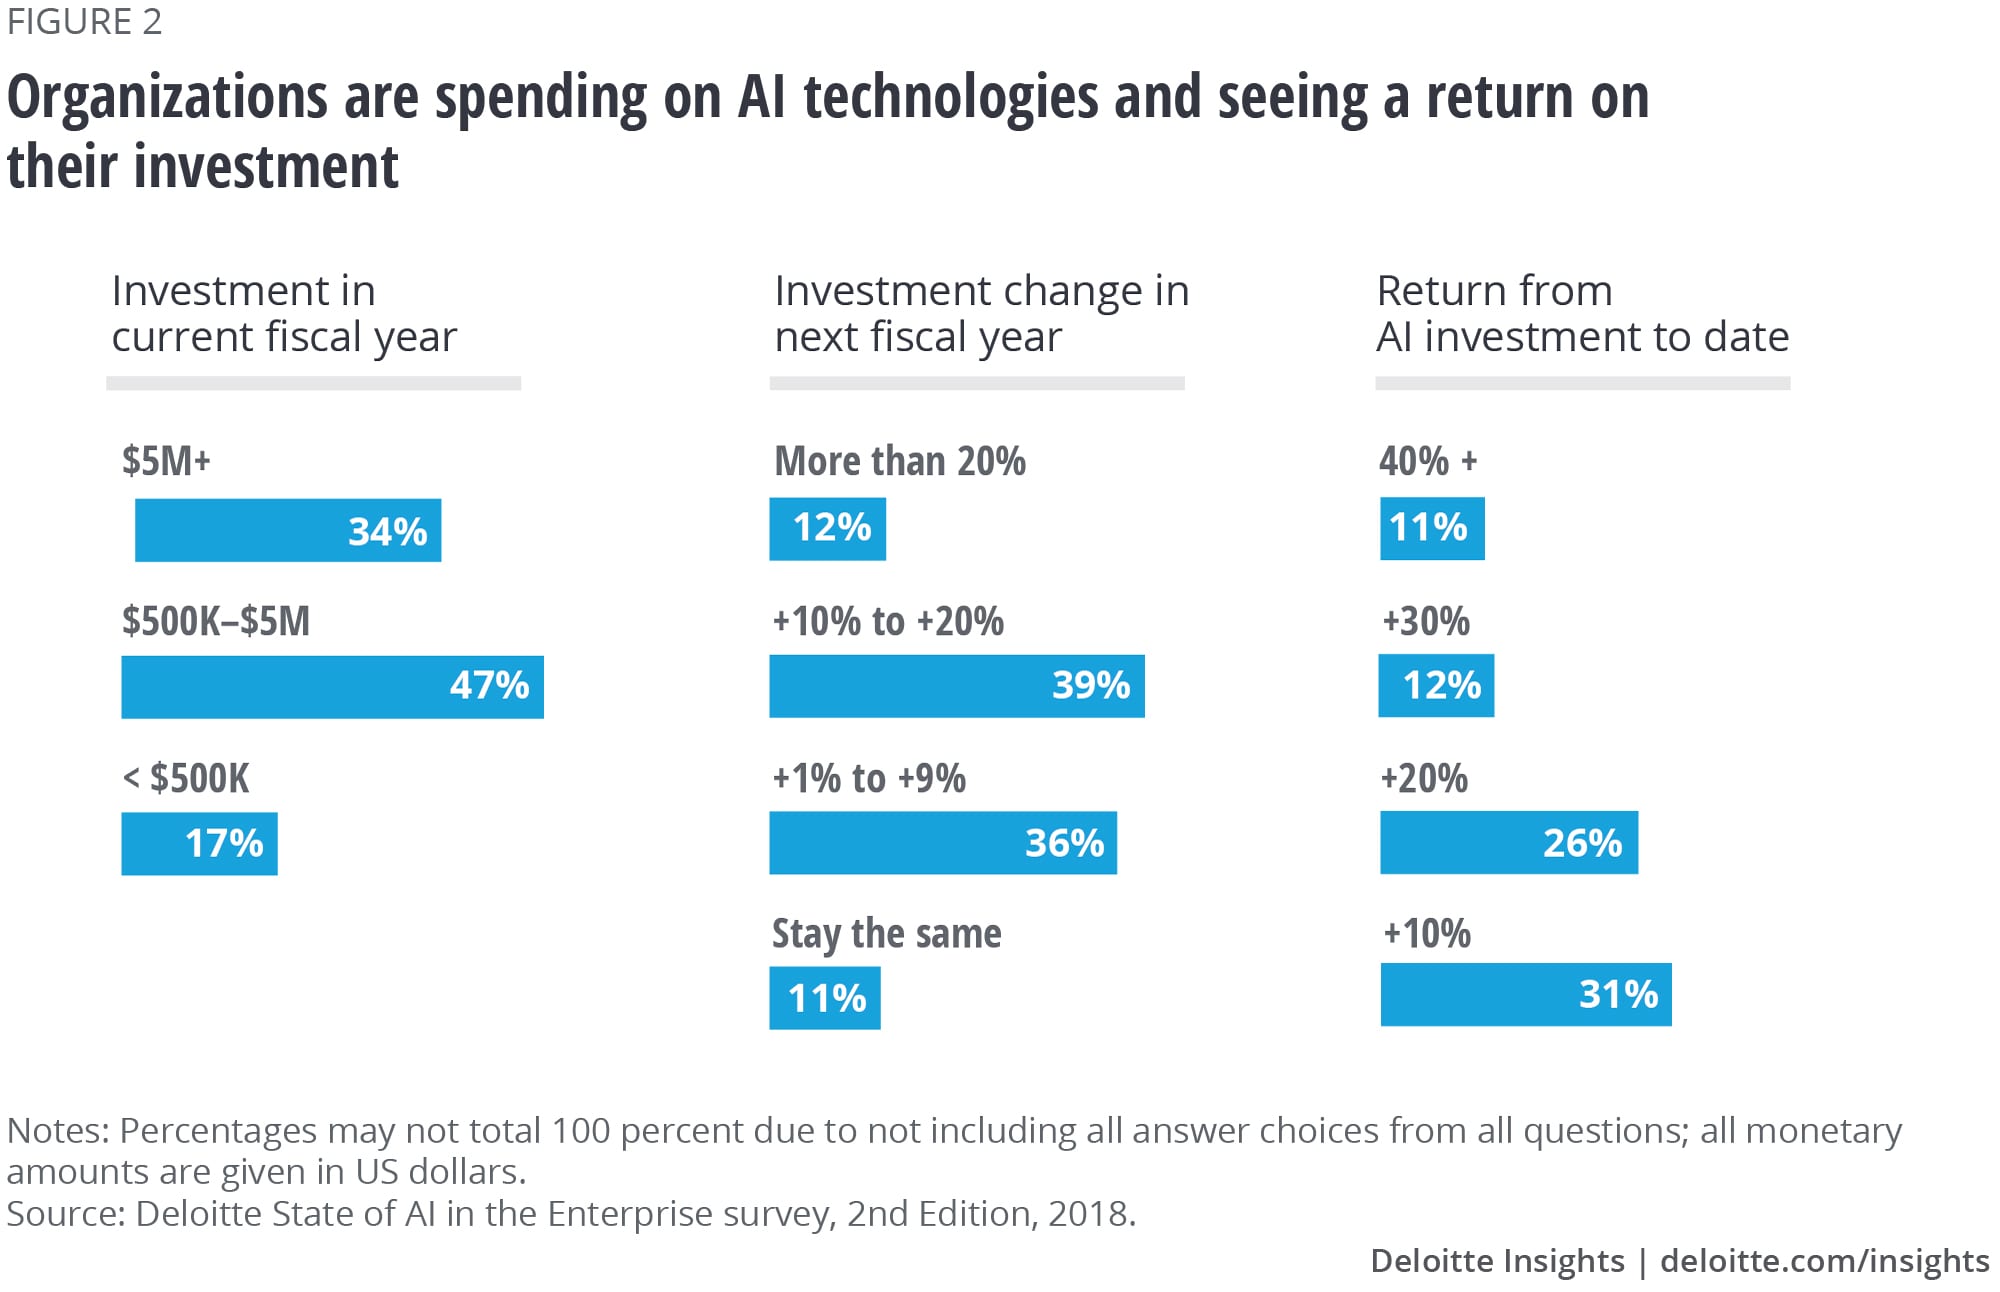 Organizations are spending on AI technologies and seeing a return on their investment